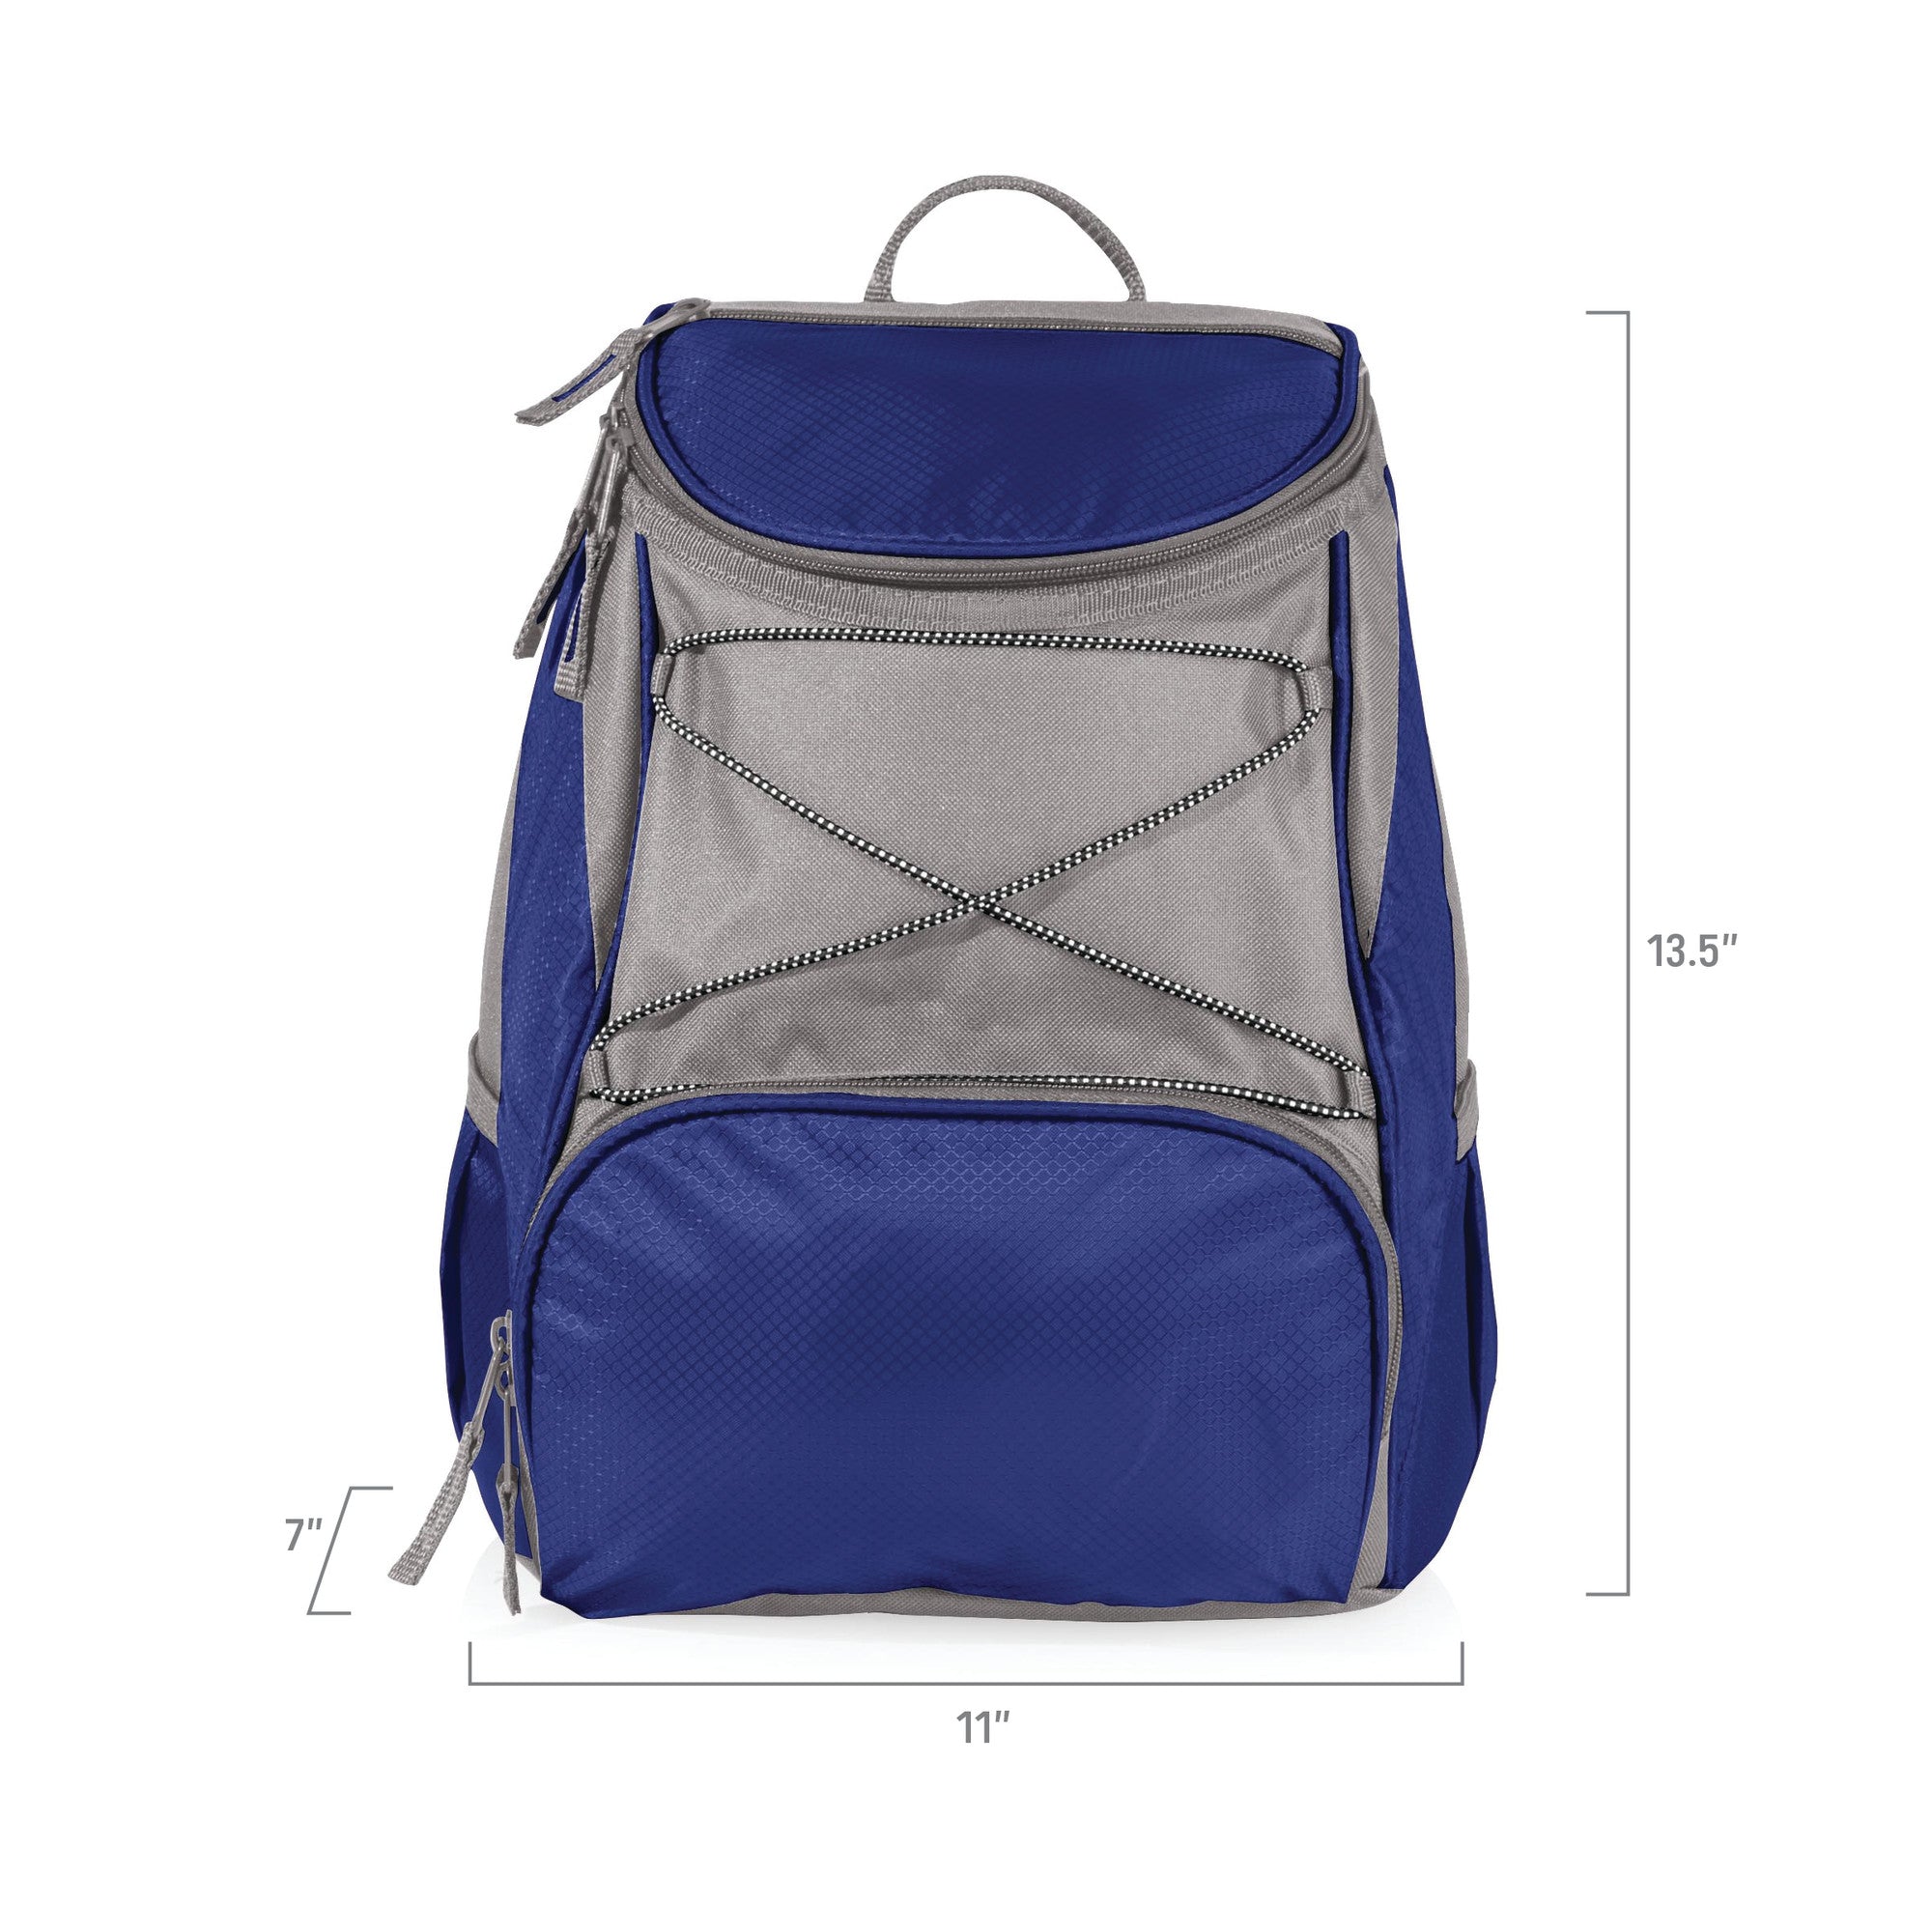 Tampa Bay Rays - PTX Backpack Cooler